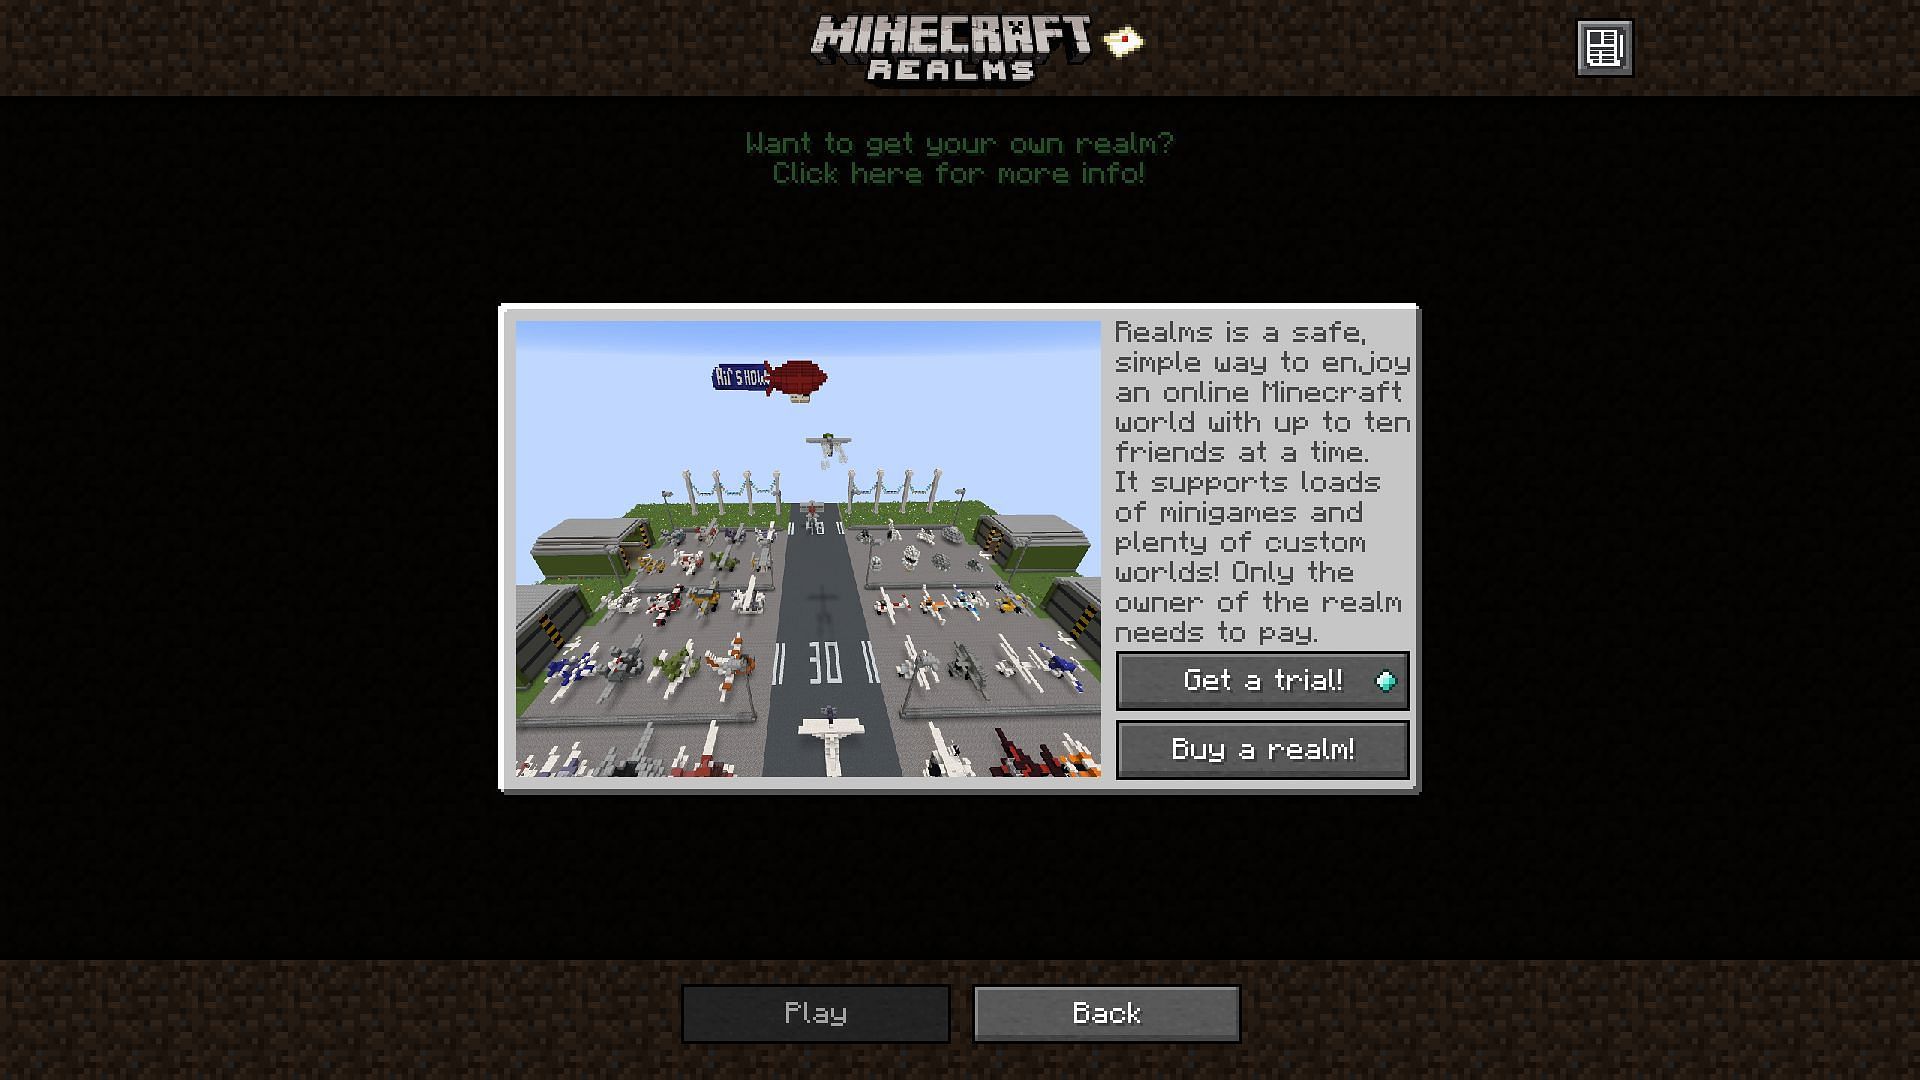 Minecraft realms main page when players haven